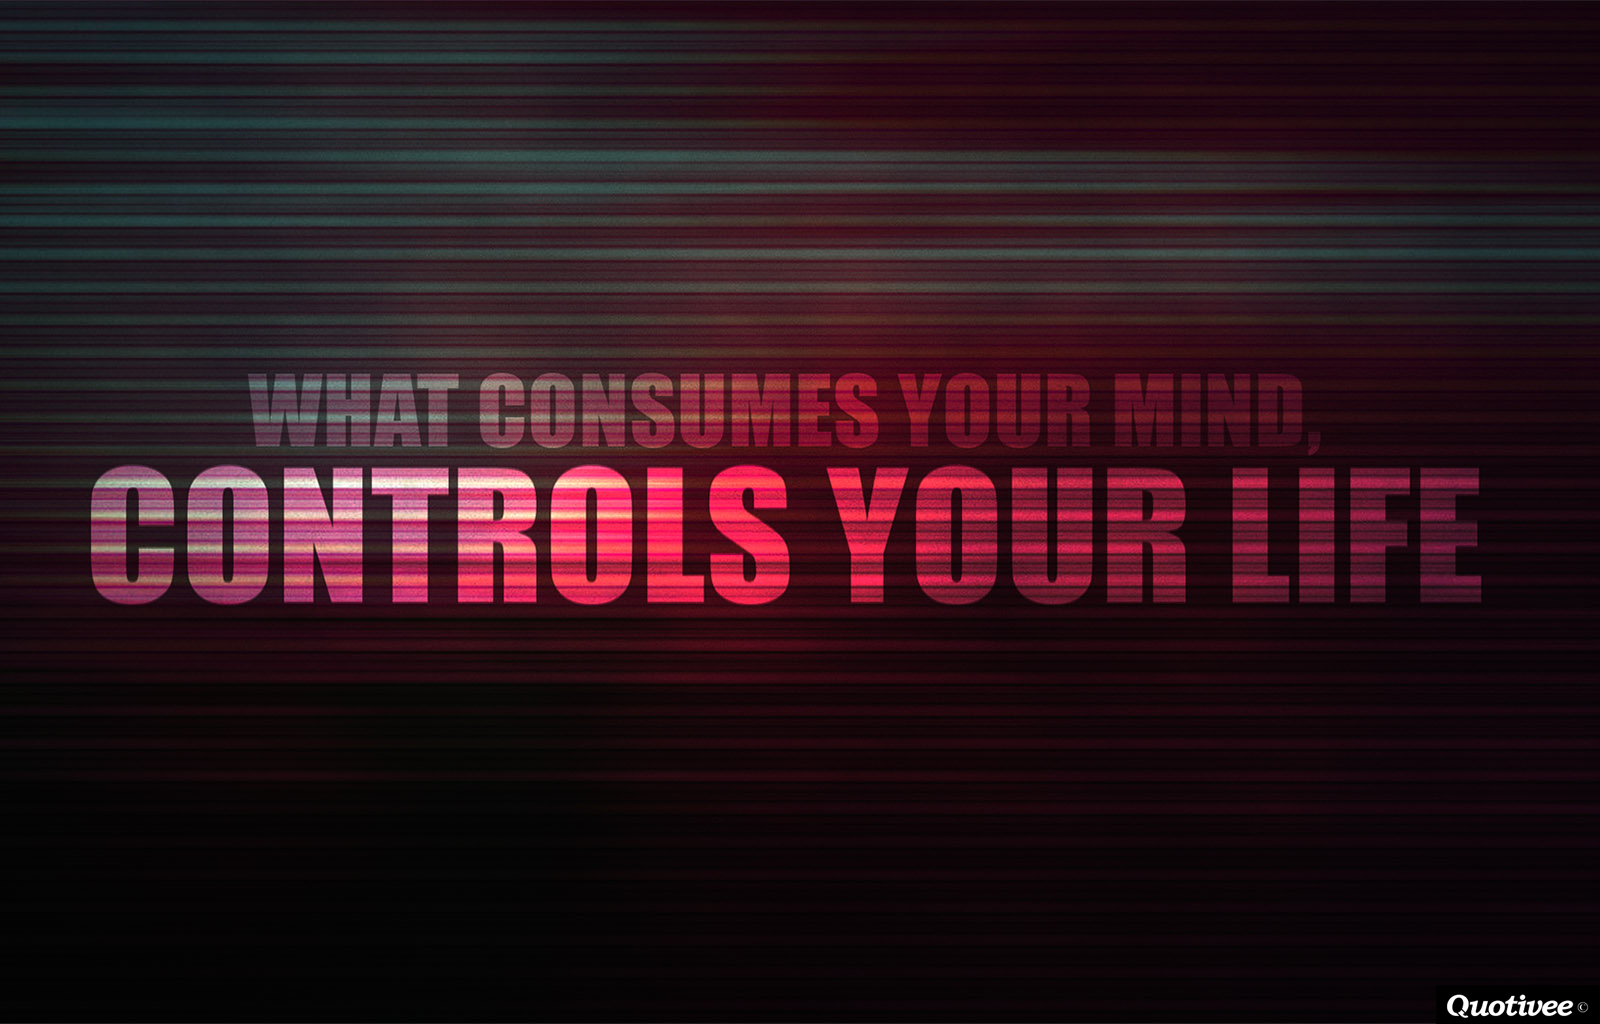 Motivational Wallpaper on Life: What consumes your mind controls your life  - Dont Give Up World